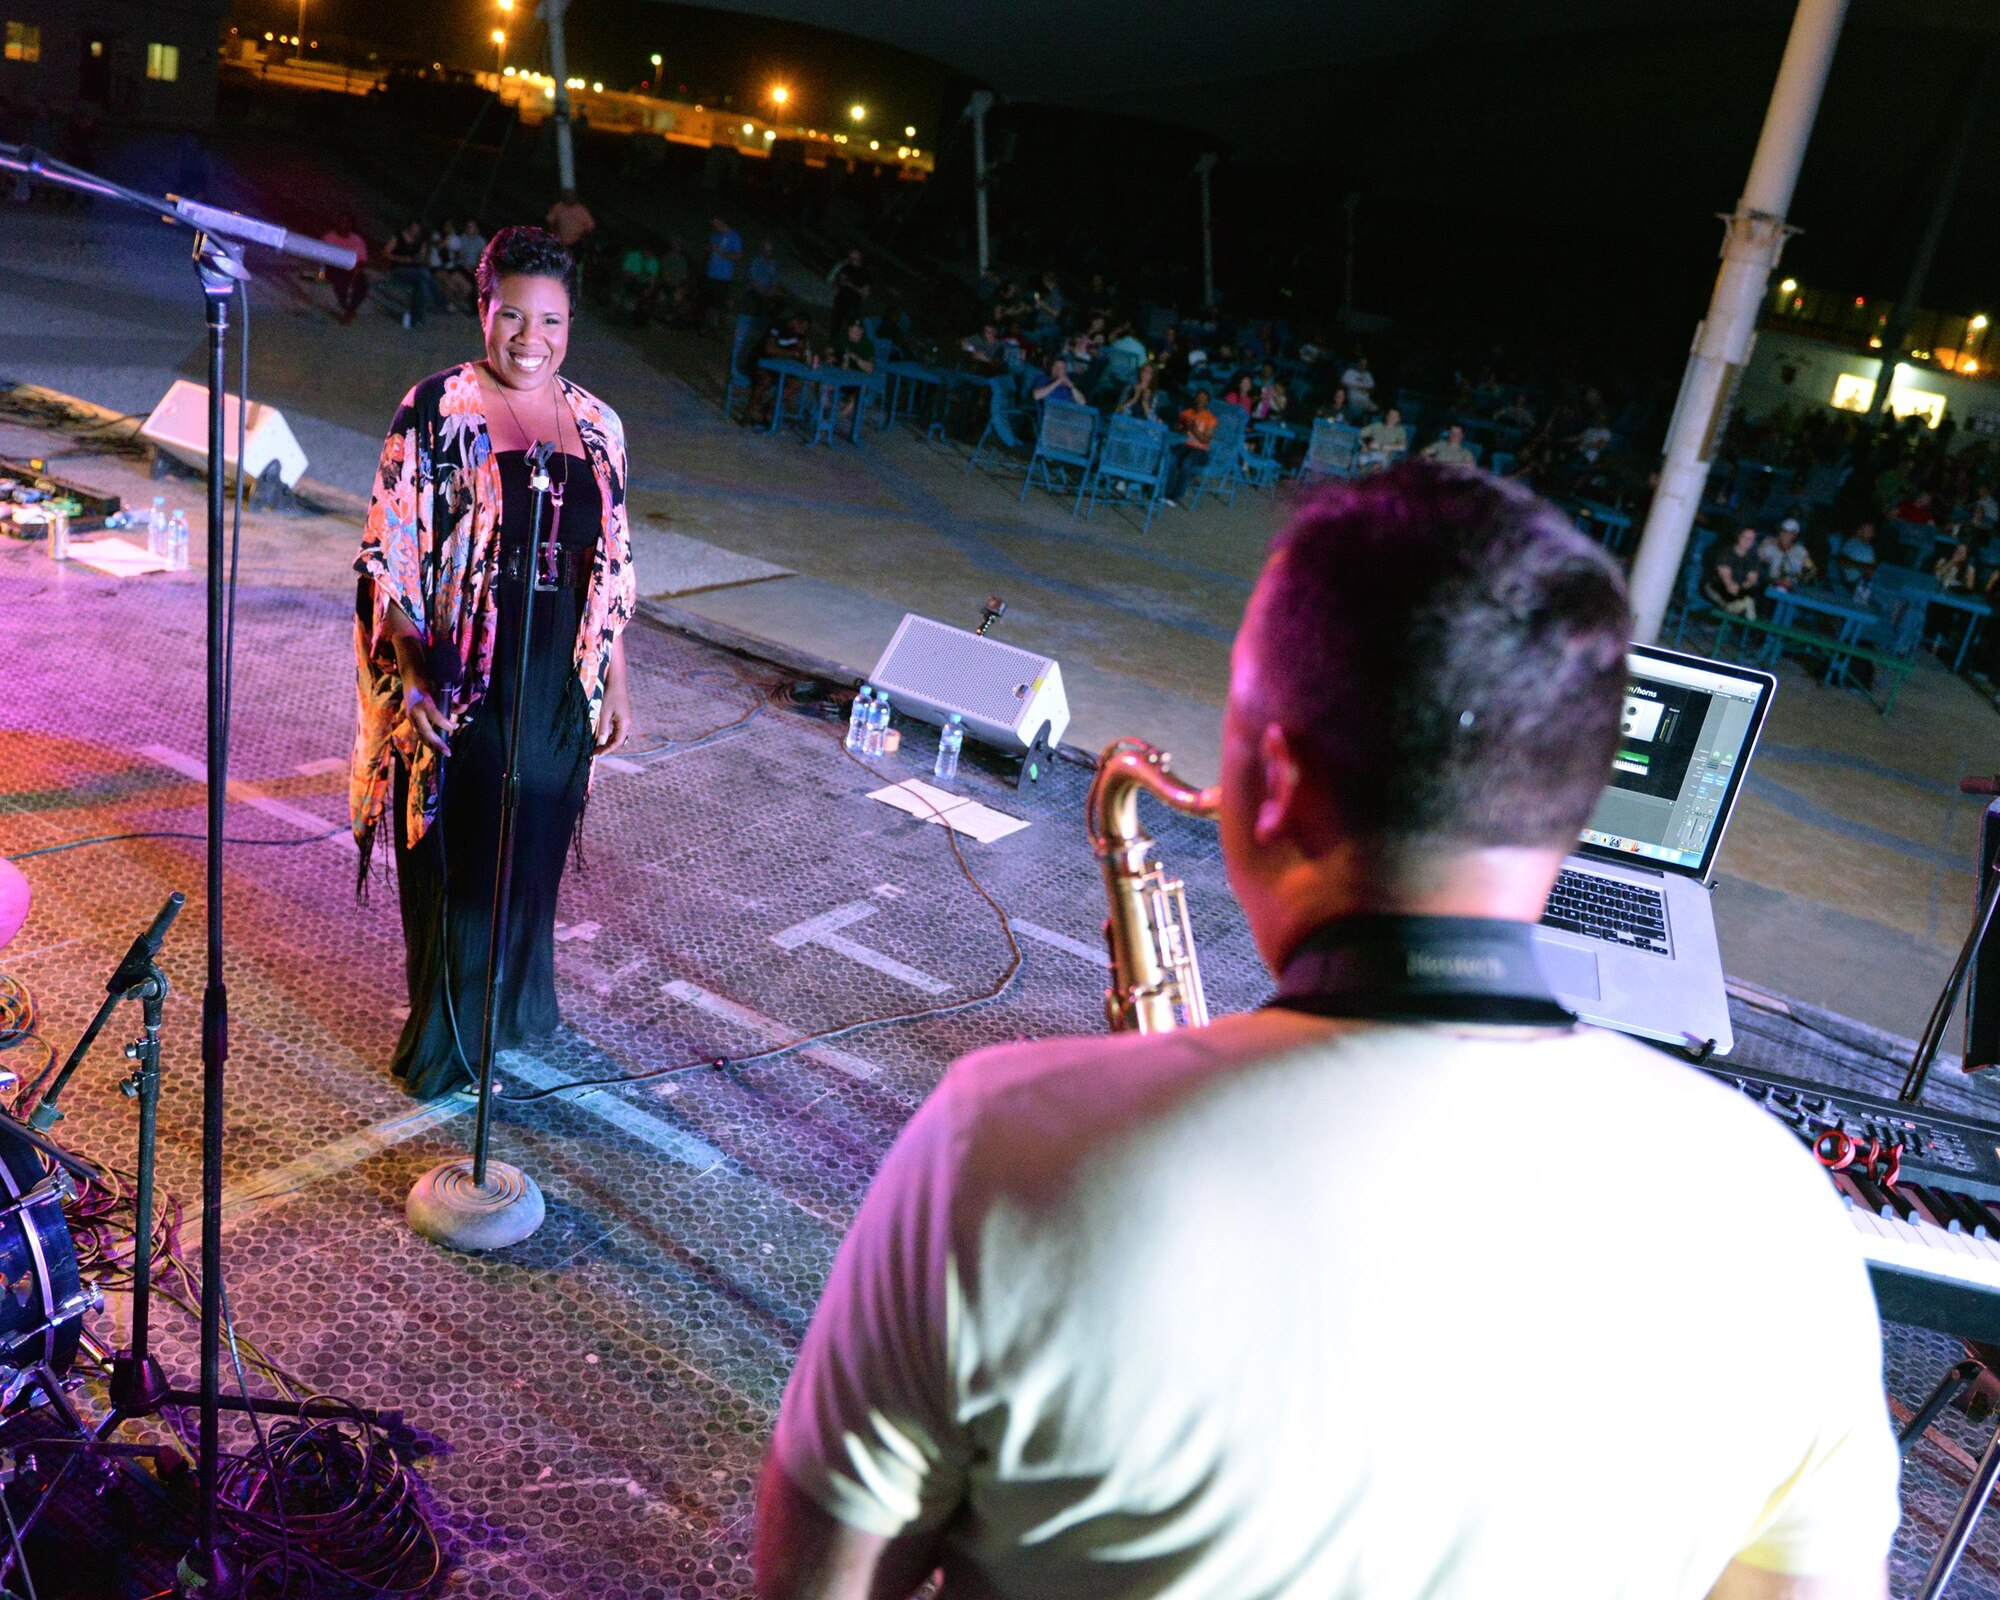 Melinda Doolittle, an accomplished vocalist and top finisher on American Idol, looks on as U.S. Air Force Technical Sgt. Ryan Janus, Air Forces Central Command Band keyboard player and saxophonist, plays a solo on the saxophone during a concert at Al Udeid Air Base, Qatar, May 25, 2017. Doolittle performed for service members deployed overseas, accompanied by the Air Forces Central Command Band. (U.S. Air Force photo by Tech. Sgt. Bradly A. Schneider/Released)